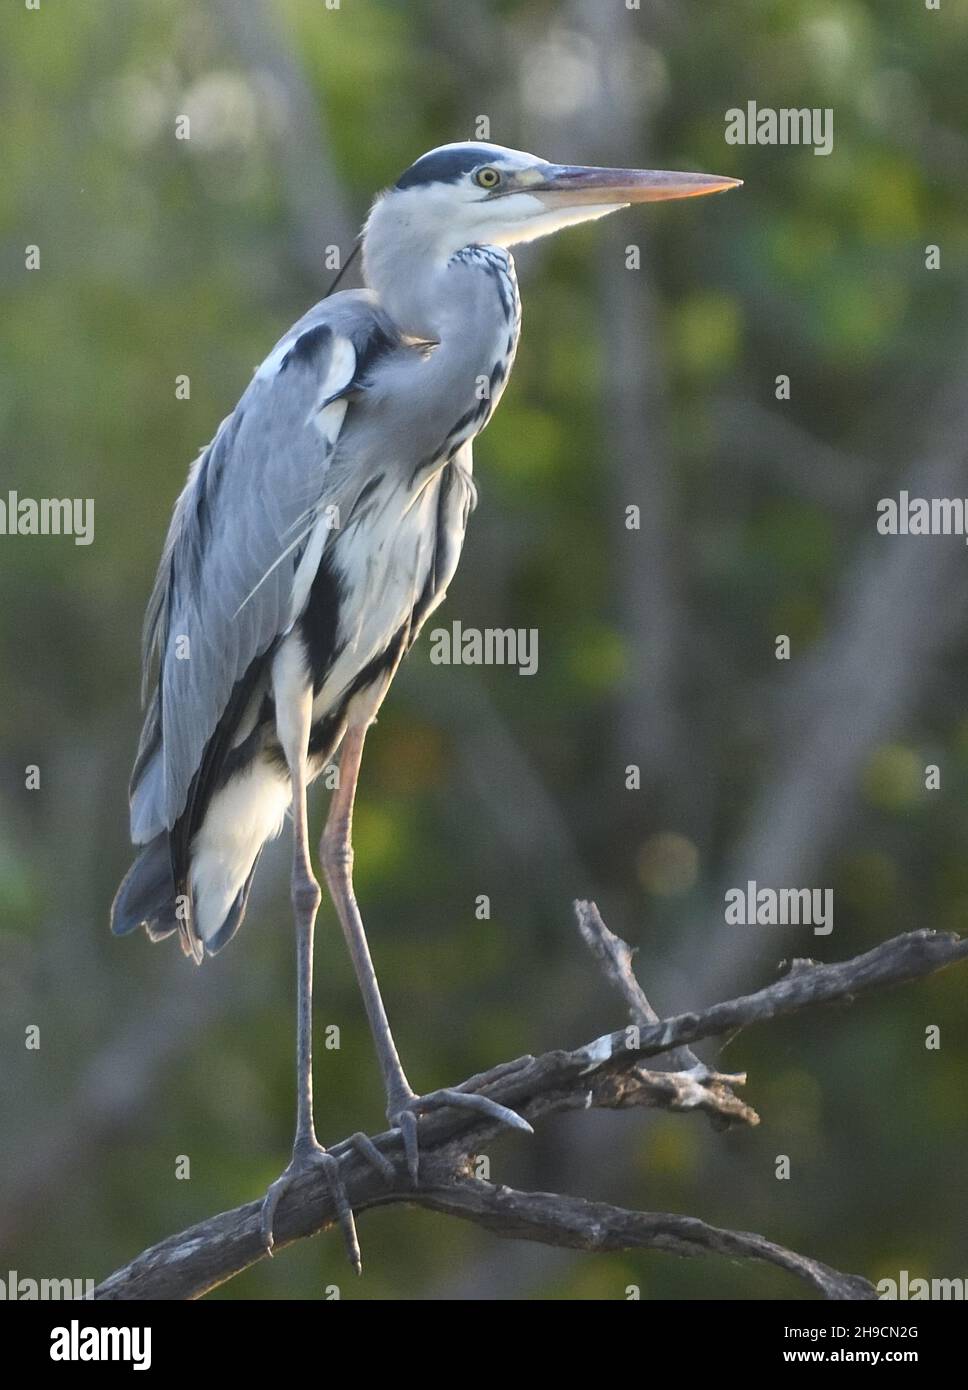 A grey heron (Ardea cinerea)  perches on a branch above a creek off the Gambia River. Tendaba, The Republic of the Gambia. Stock Photo